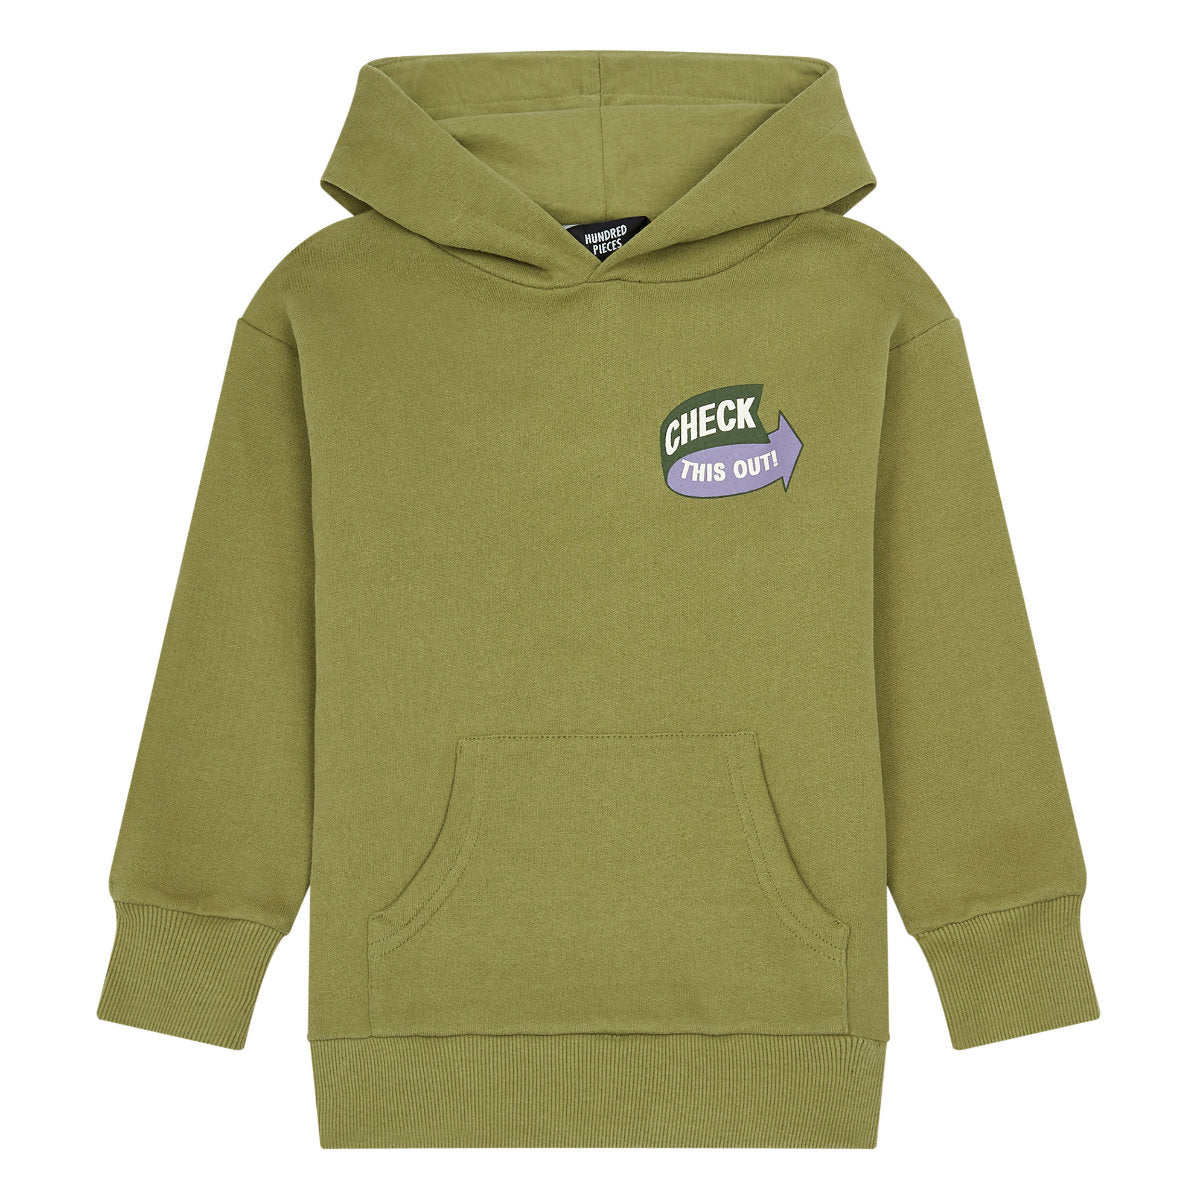 Hundred Pieces Stay Loose Sweatshirt green